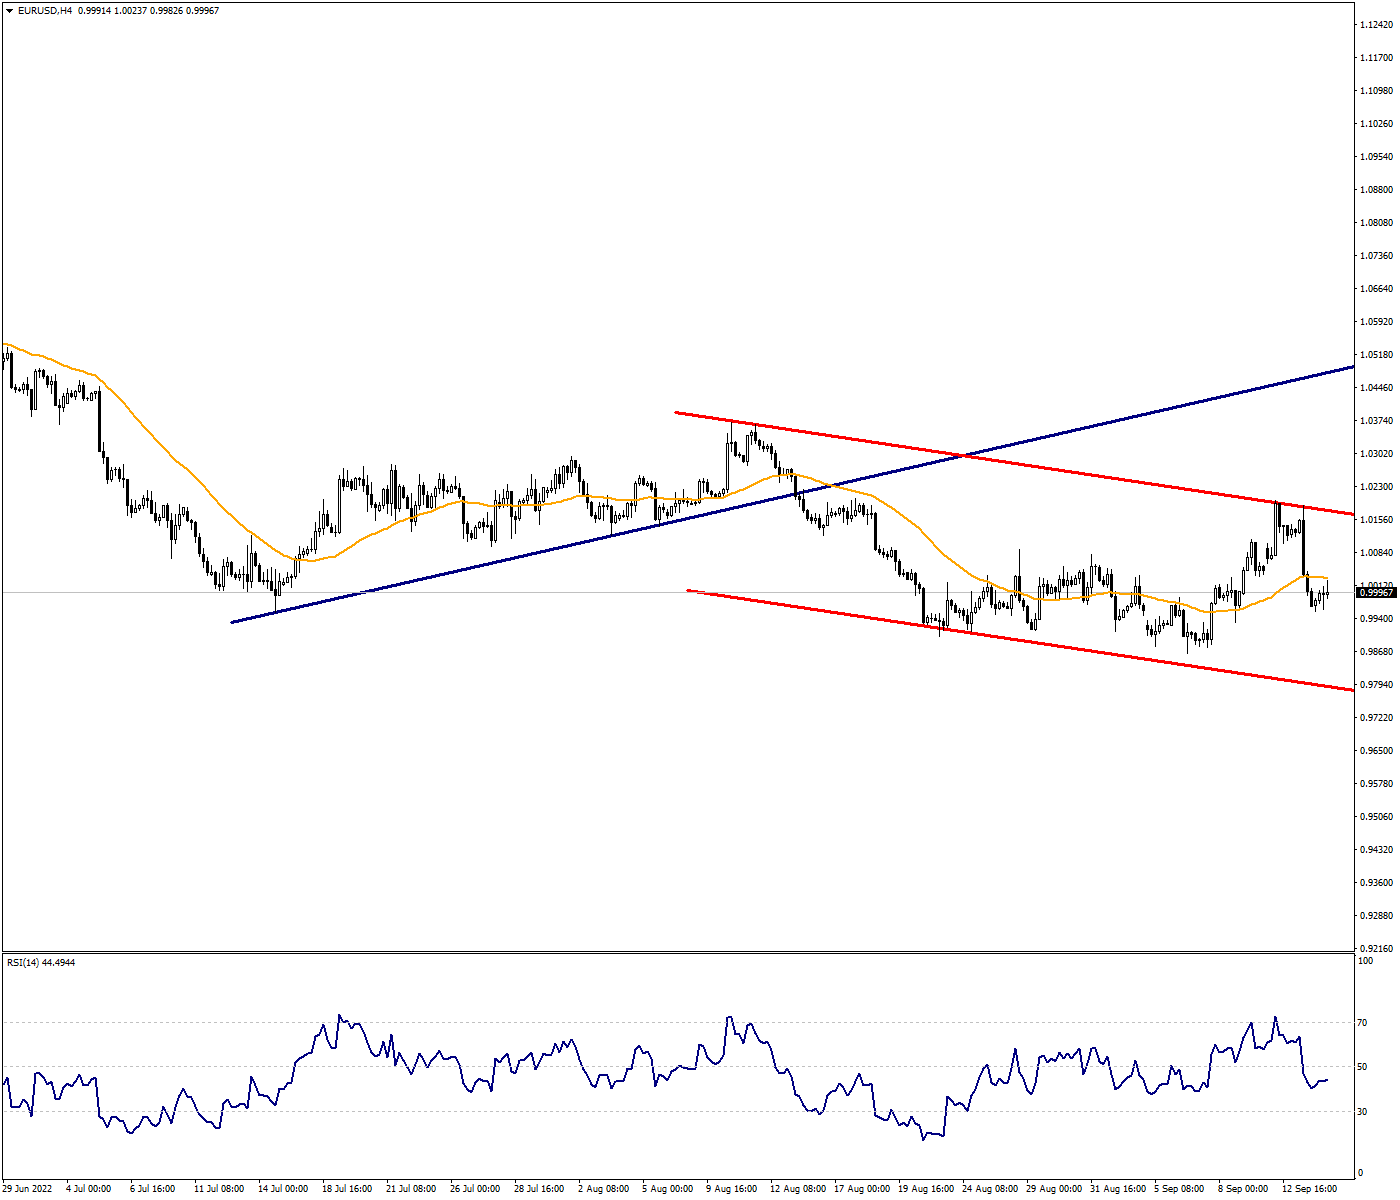 Selling Pressure May Continue in EURUSD